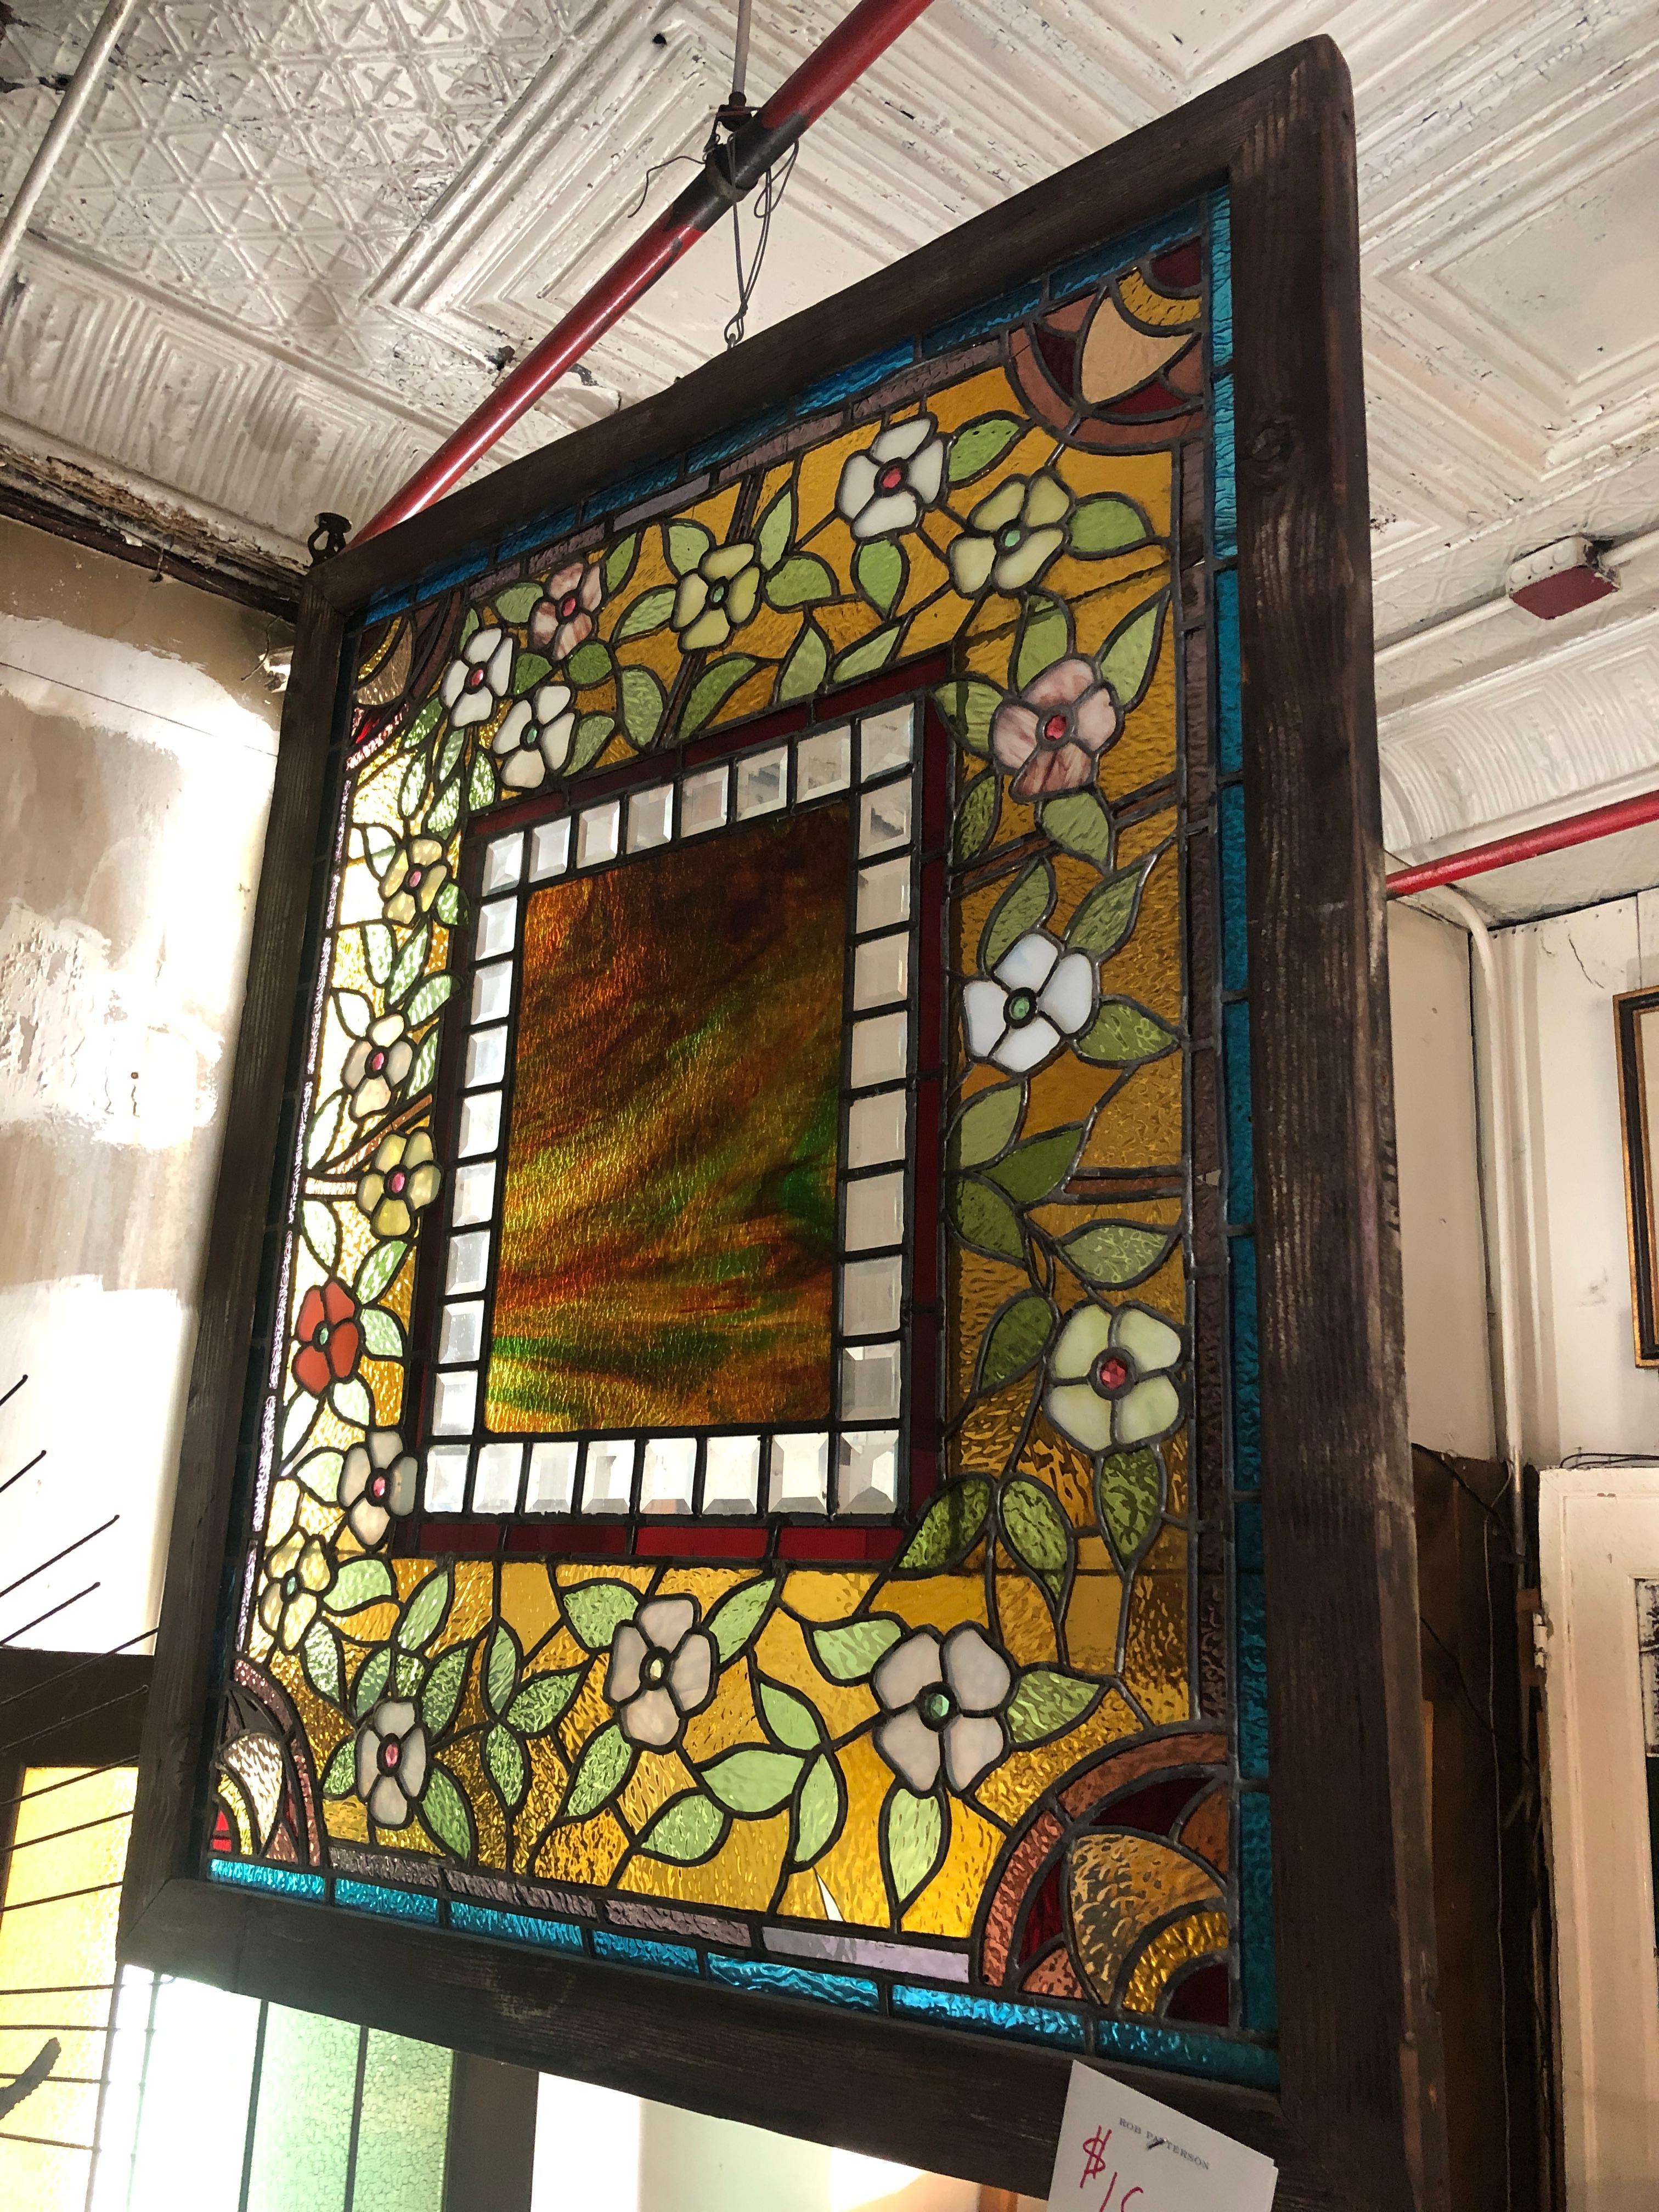 American made stained glass window with masterful coloring and led work. Deep colors of blue and red with amber.
Currently housed in a temporary wooden frame - the overall dimensions are for the stained glass and the frame.
Located in NY